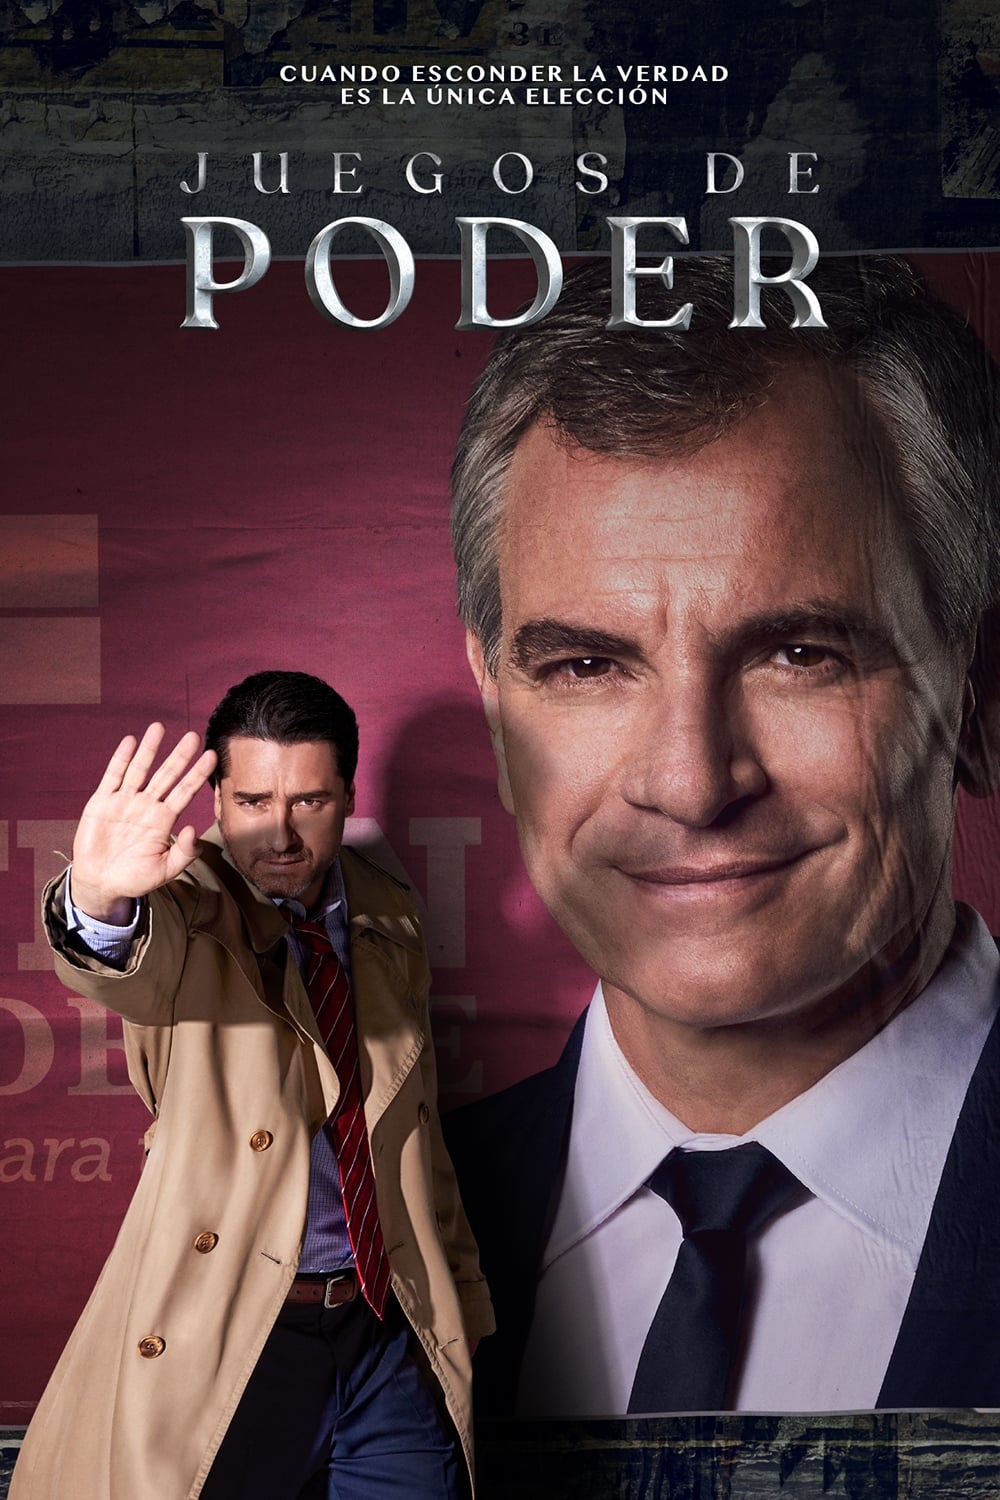 Juegos de poder TV Shows About Presidential Candidate